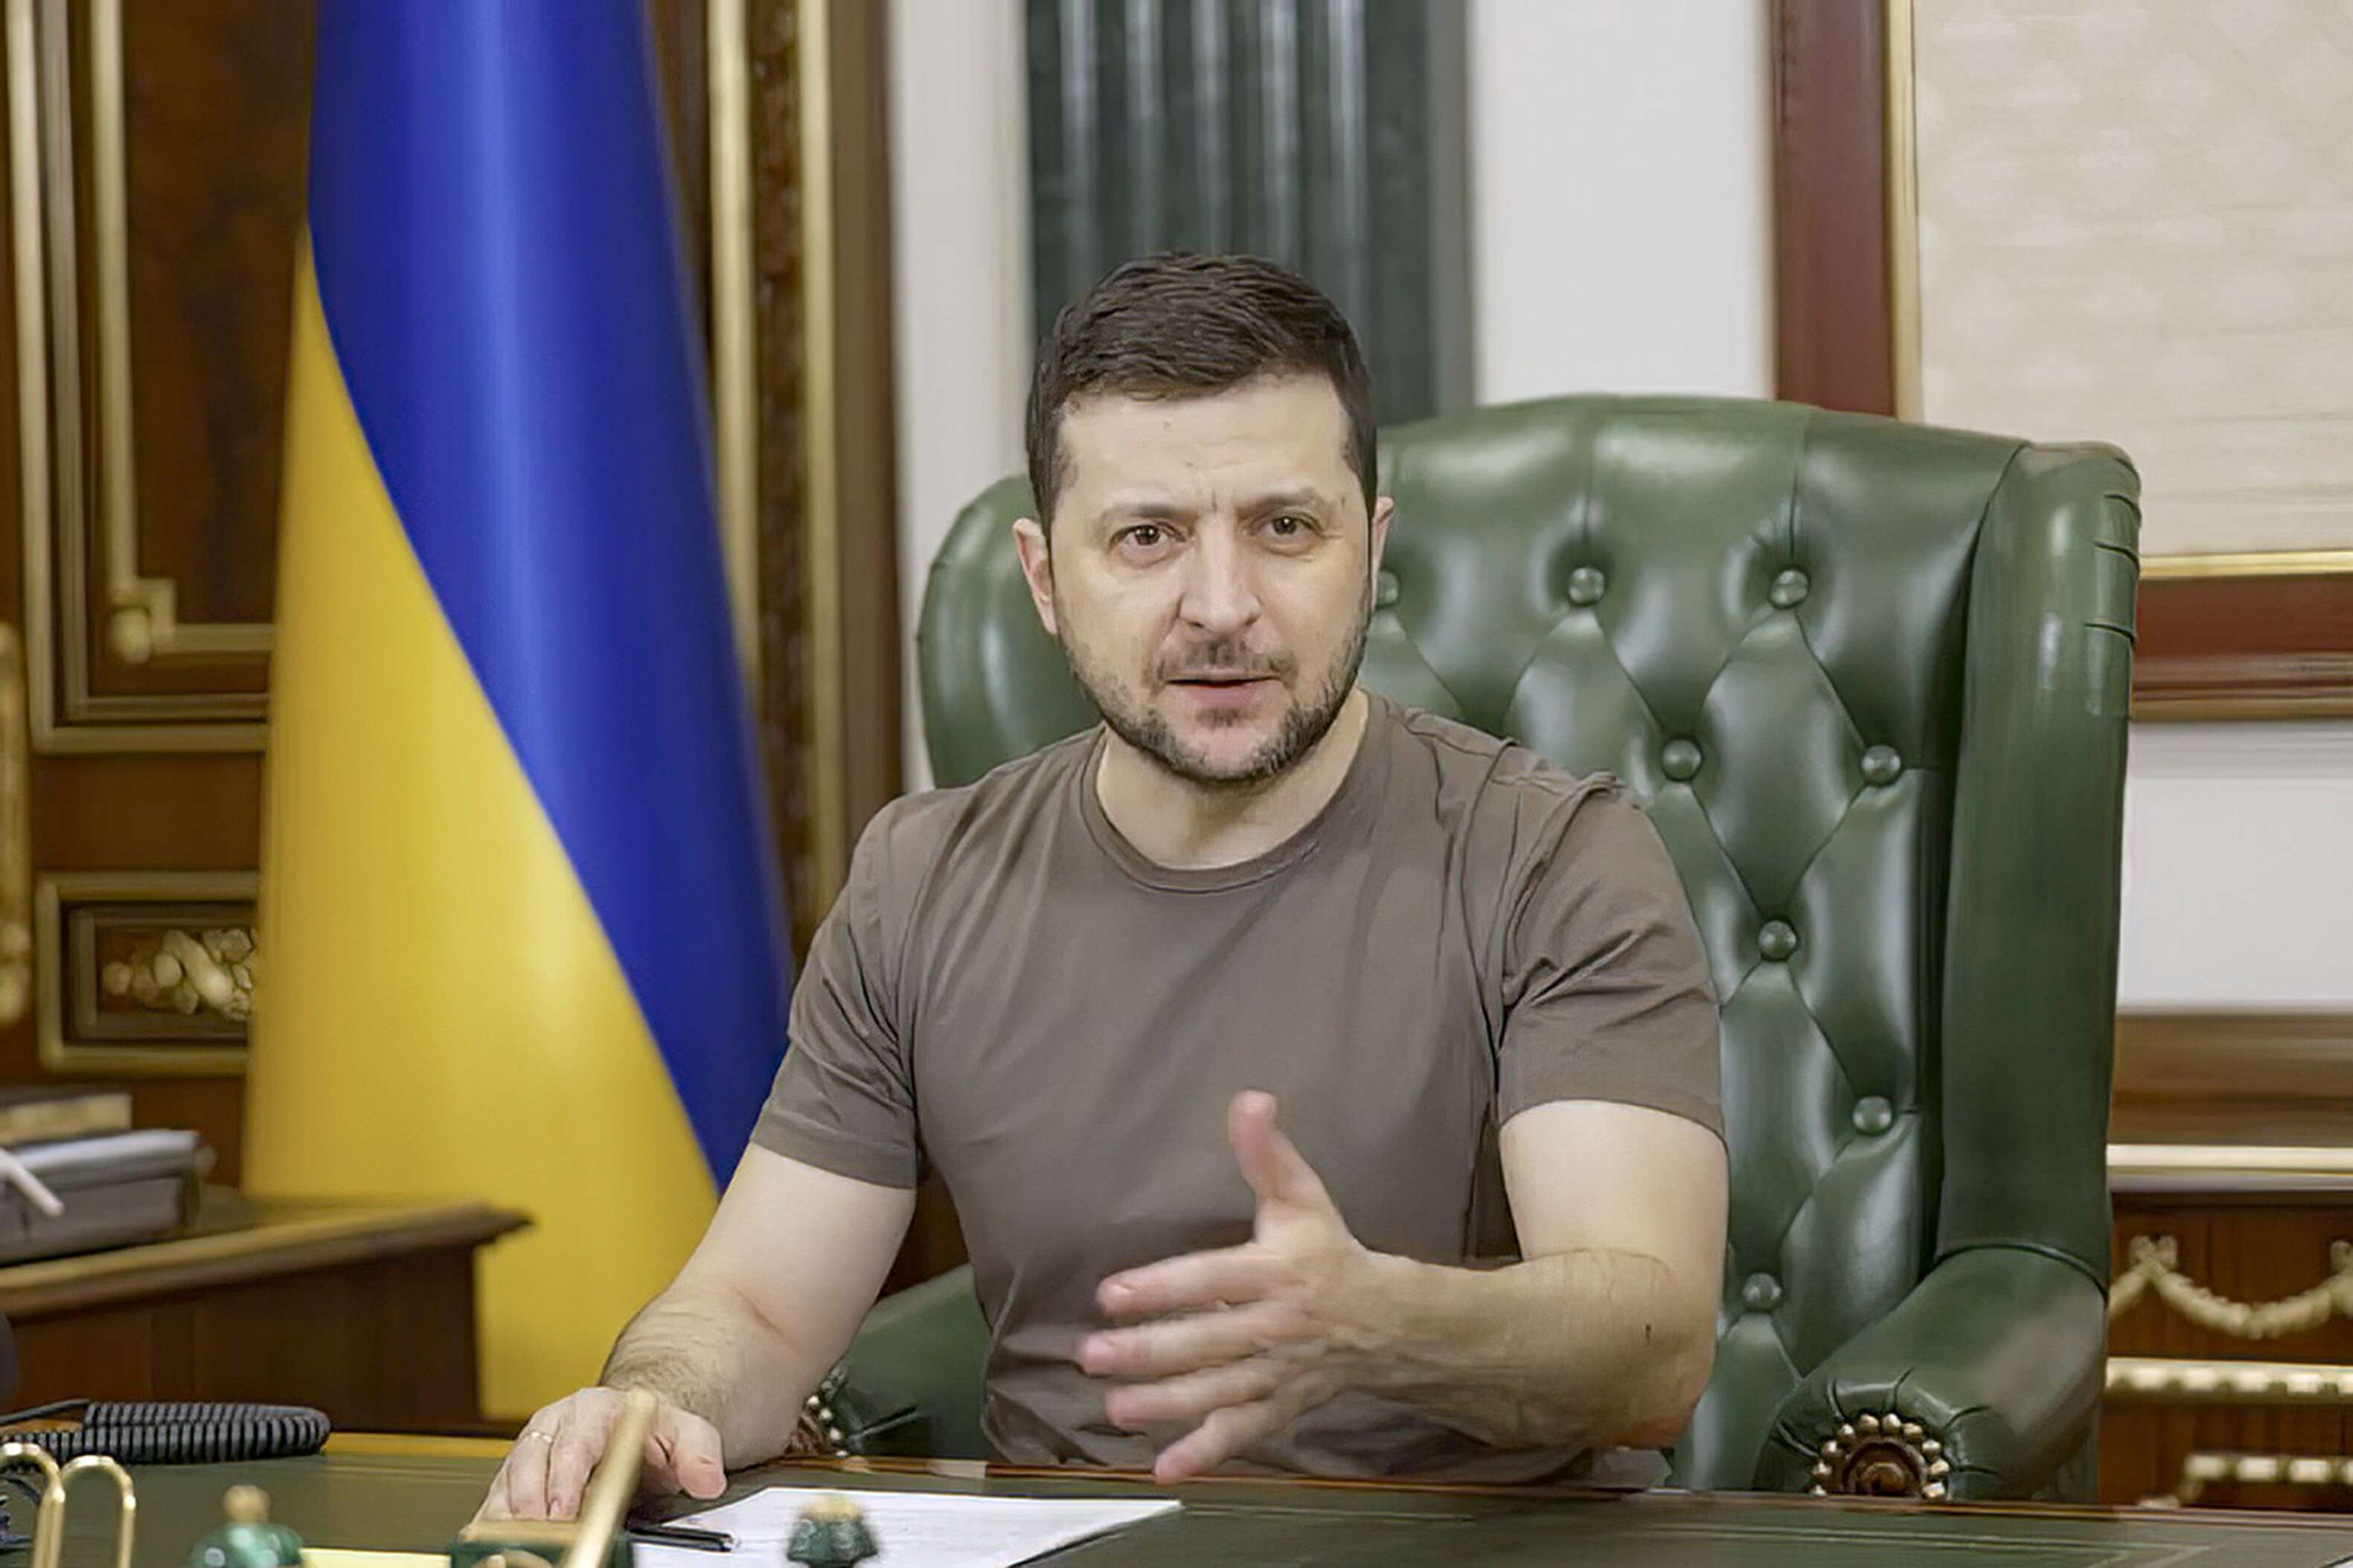 Zelenskyy: Russian aggression not limited to Ukraine alone